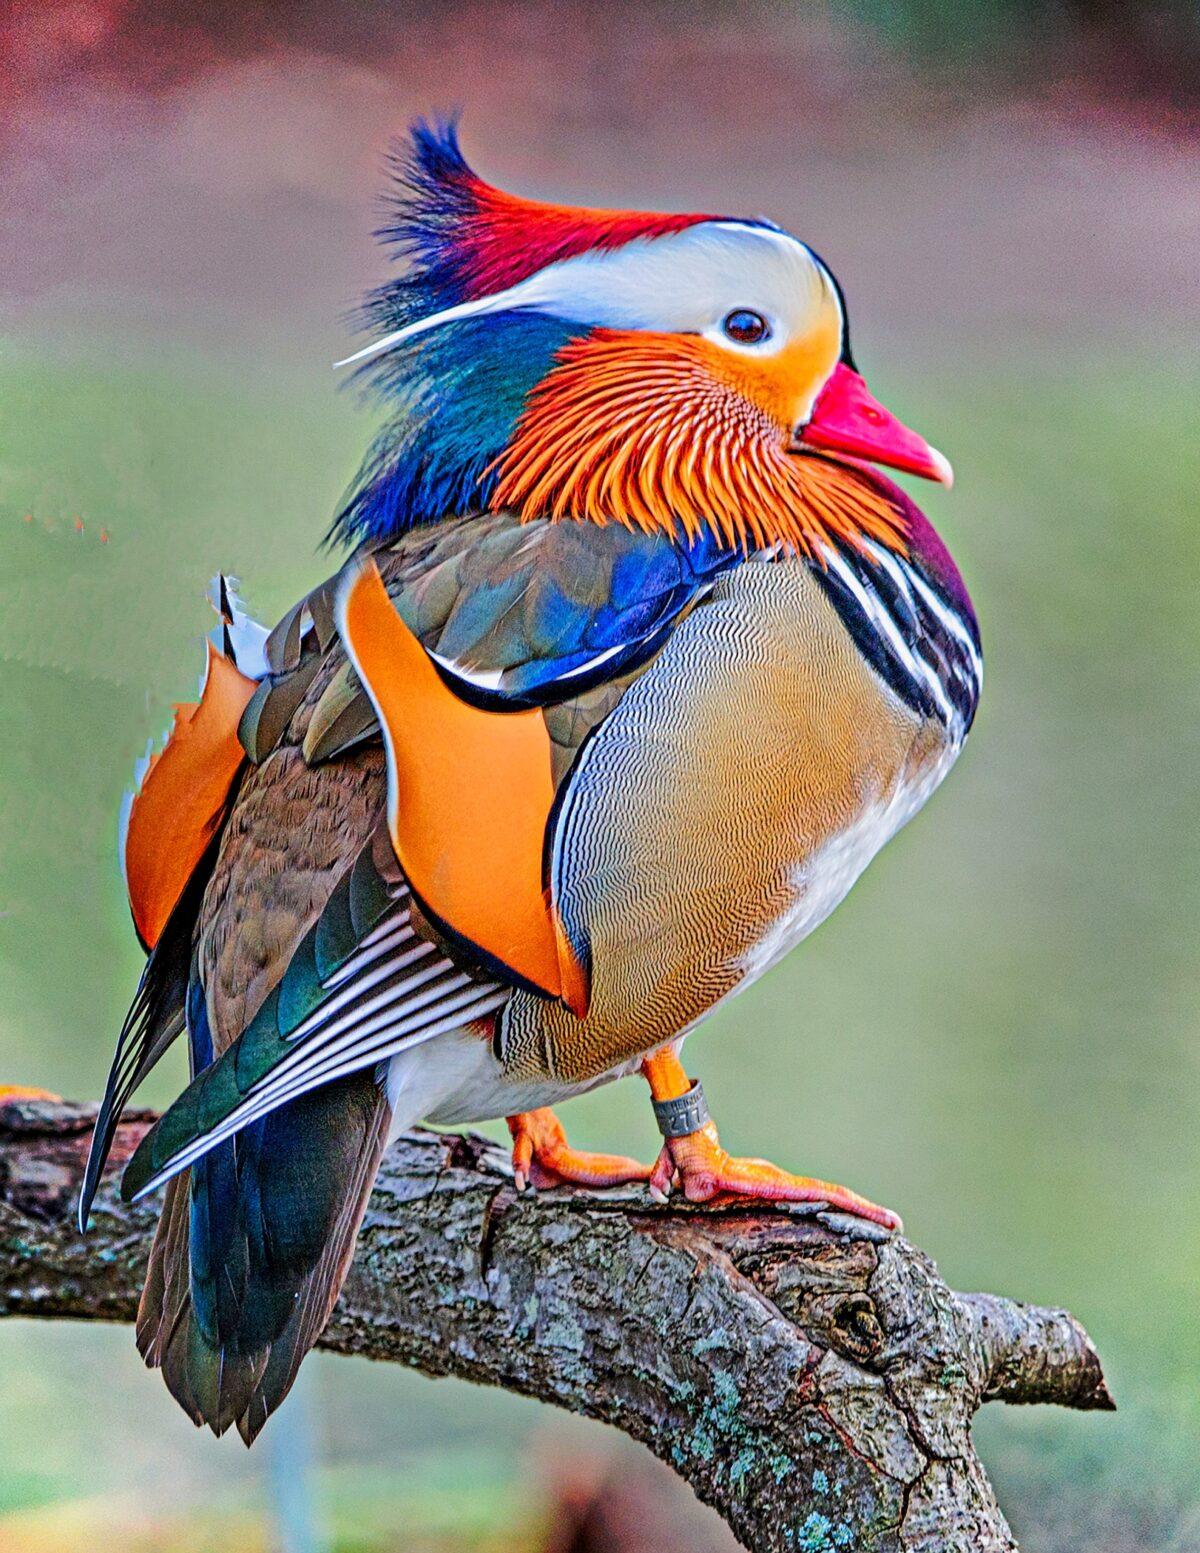 The mandarin duck, found in East Asia, is closely related to the North American wood duck. (Copyright Fred J. Eckert)